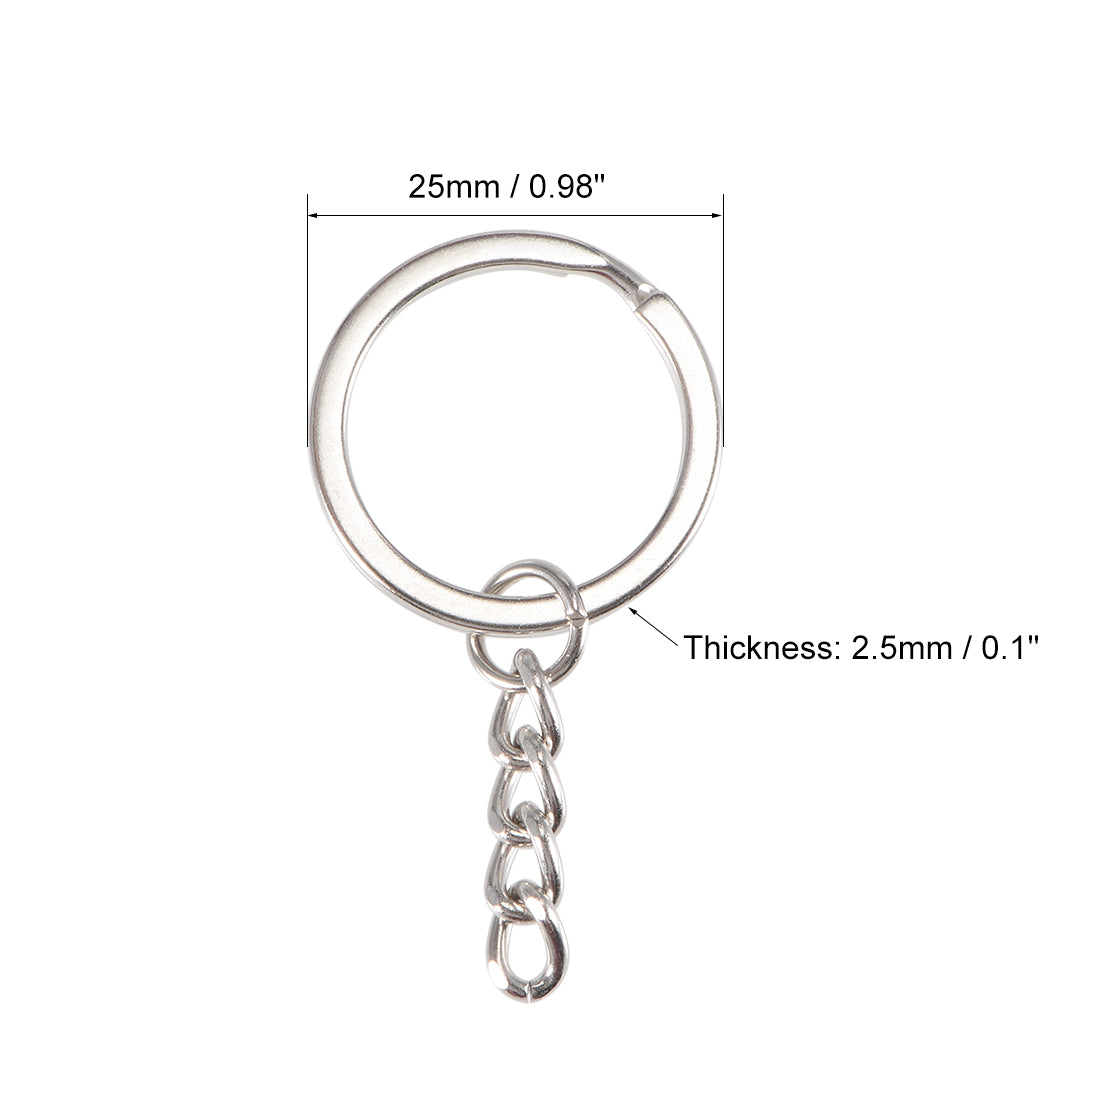 uxcell Uxcell Split Key Ring with Chain mm Open Jump Connector for Lanyard Zipper Handbag Art Craft, Nickel Plated Iron, Pack of 120